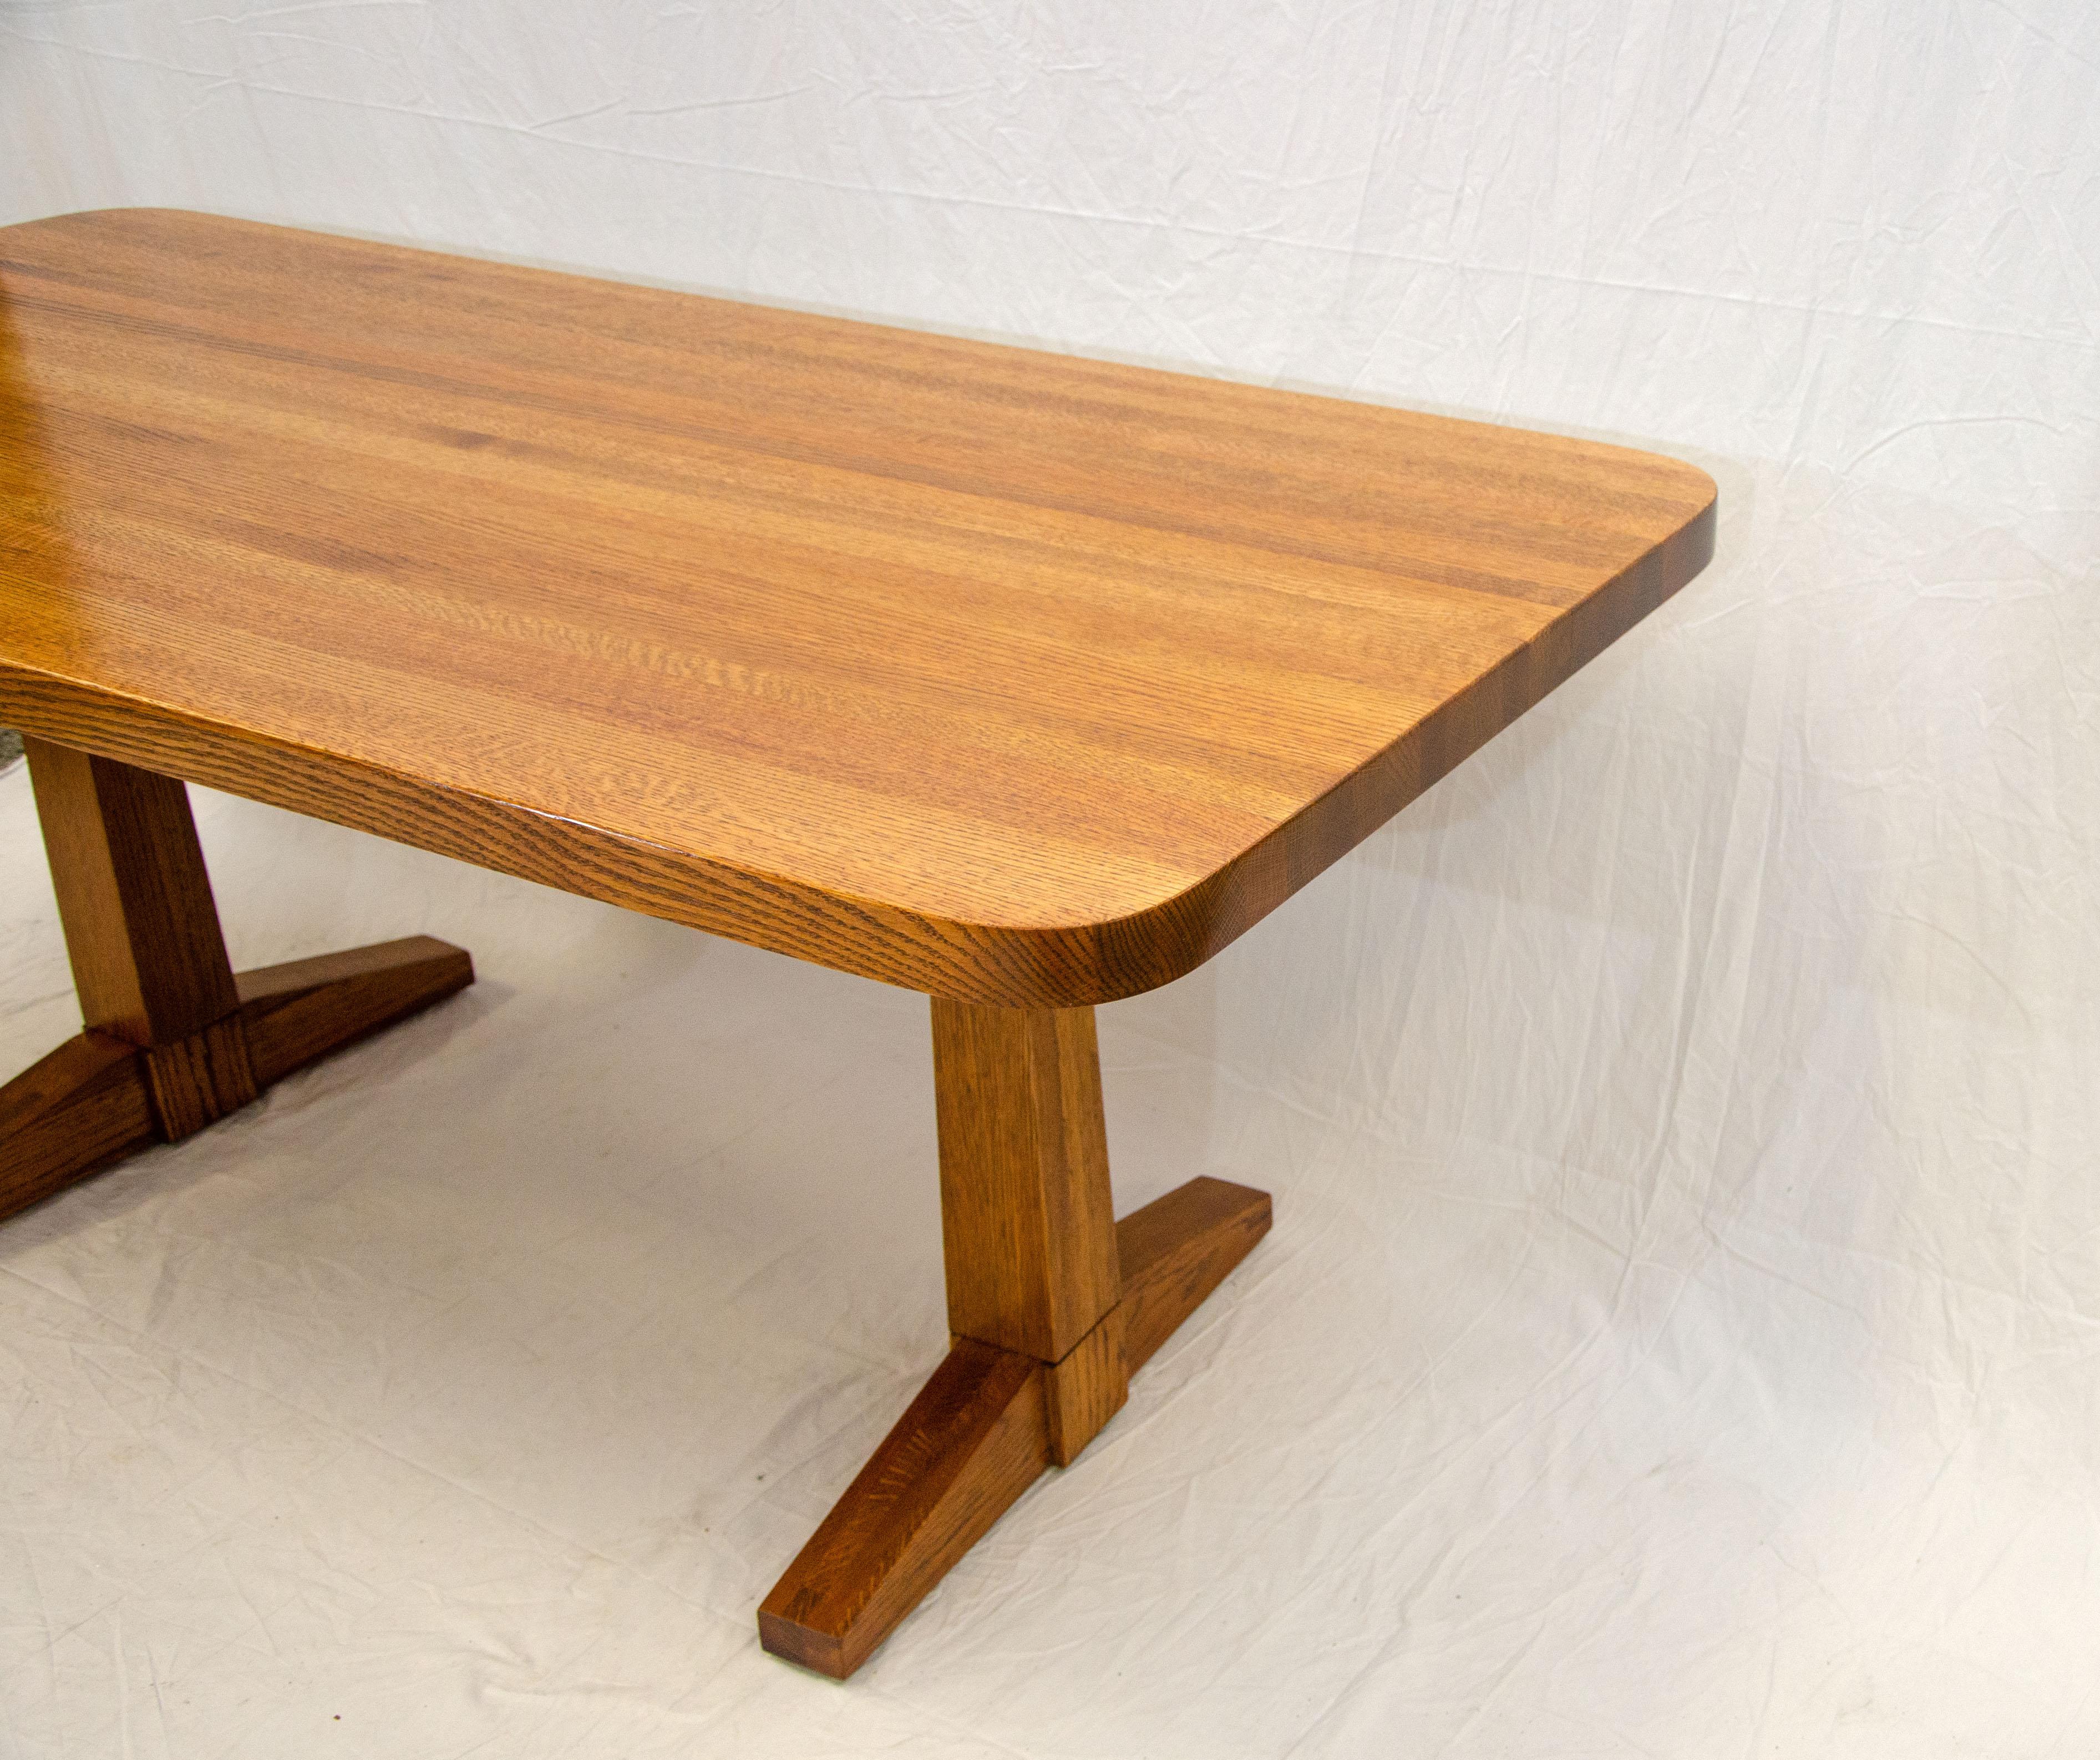 American Solid Oak Dining Table, Trestle Style